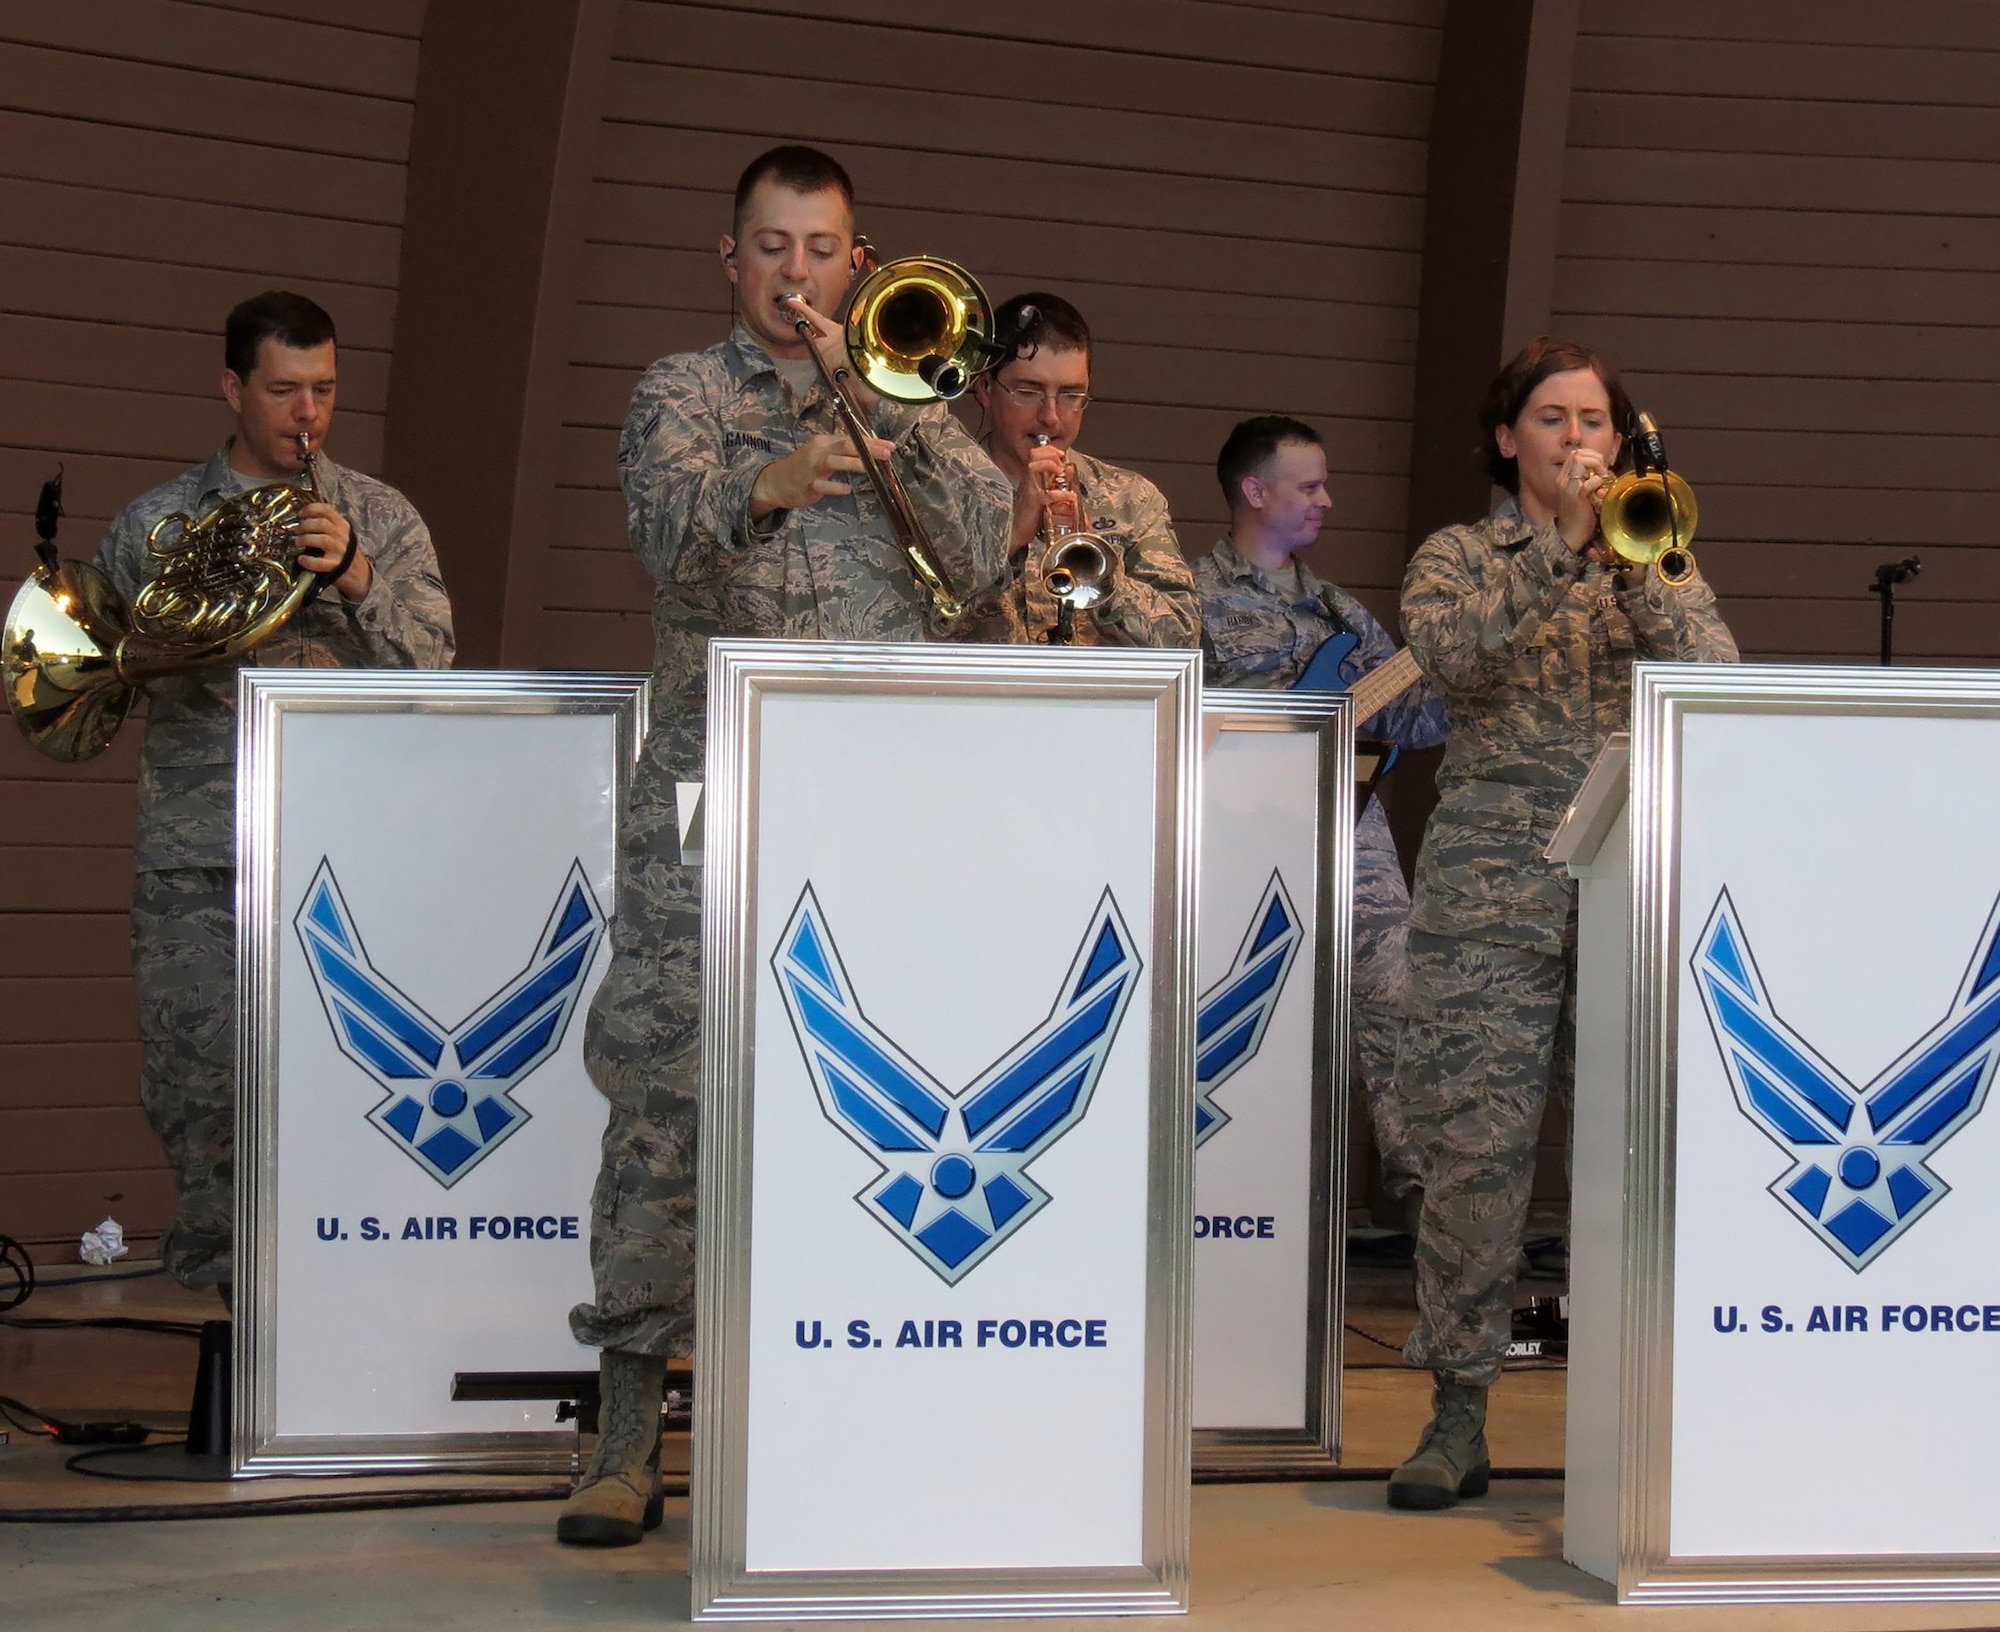 The United States Air Force Band of Flight, stationed at Wright-Patterson AFB, Ohio presents more than 240 performances annually, providing quality musical products for official military functions and ceremonies as well as civic events and public concerts. Since its founding in 1942, the band has performed for presidents and vice presidents, visiting heads of state, cabinet officers, members of congress, U.S. and foreign military leaders, and millions of Americans and foreign citizens.